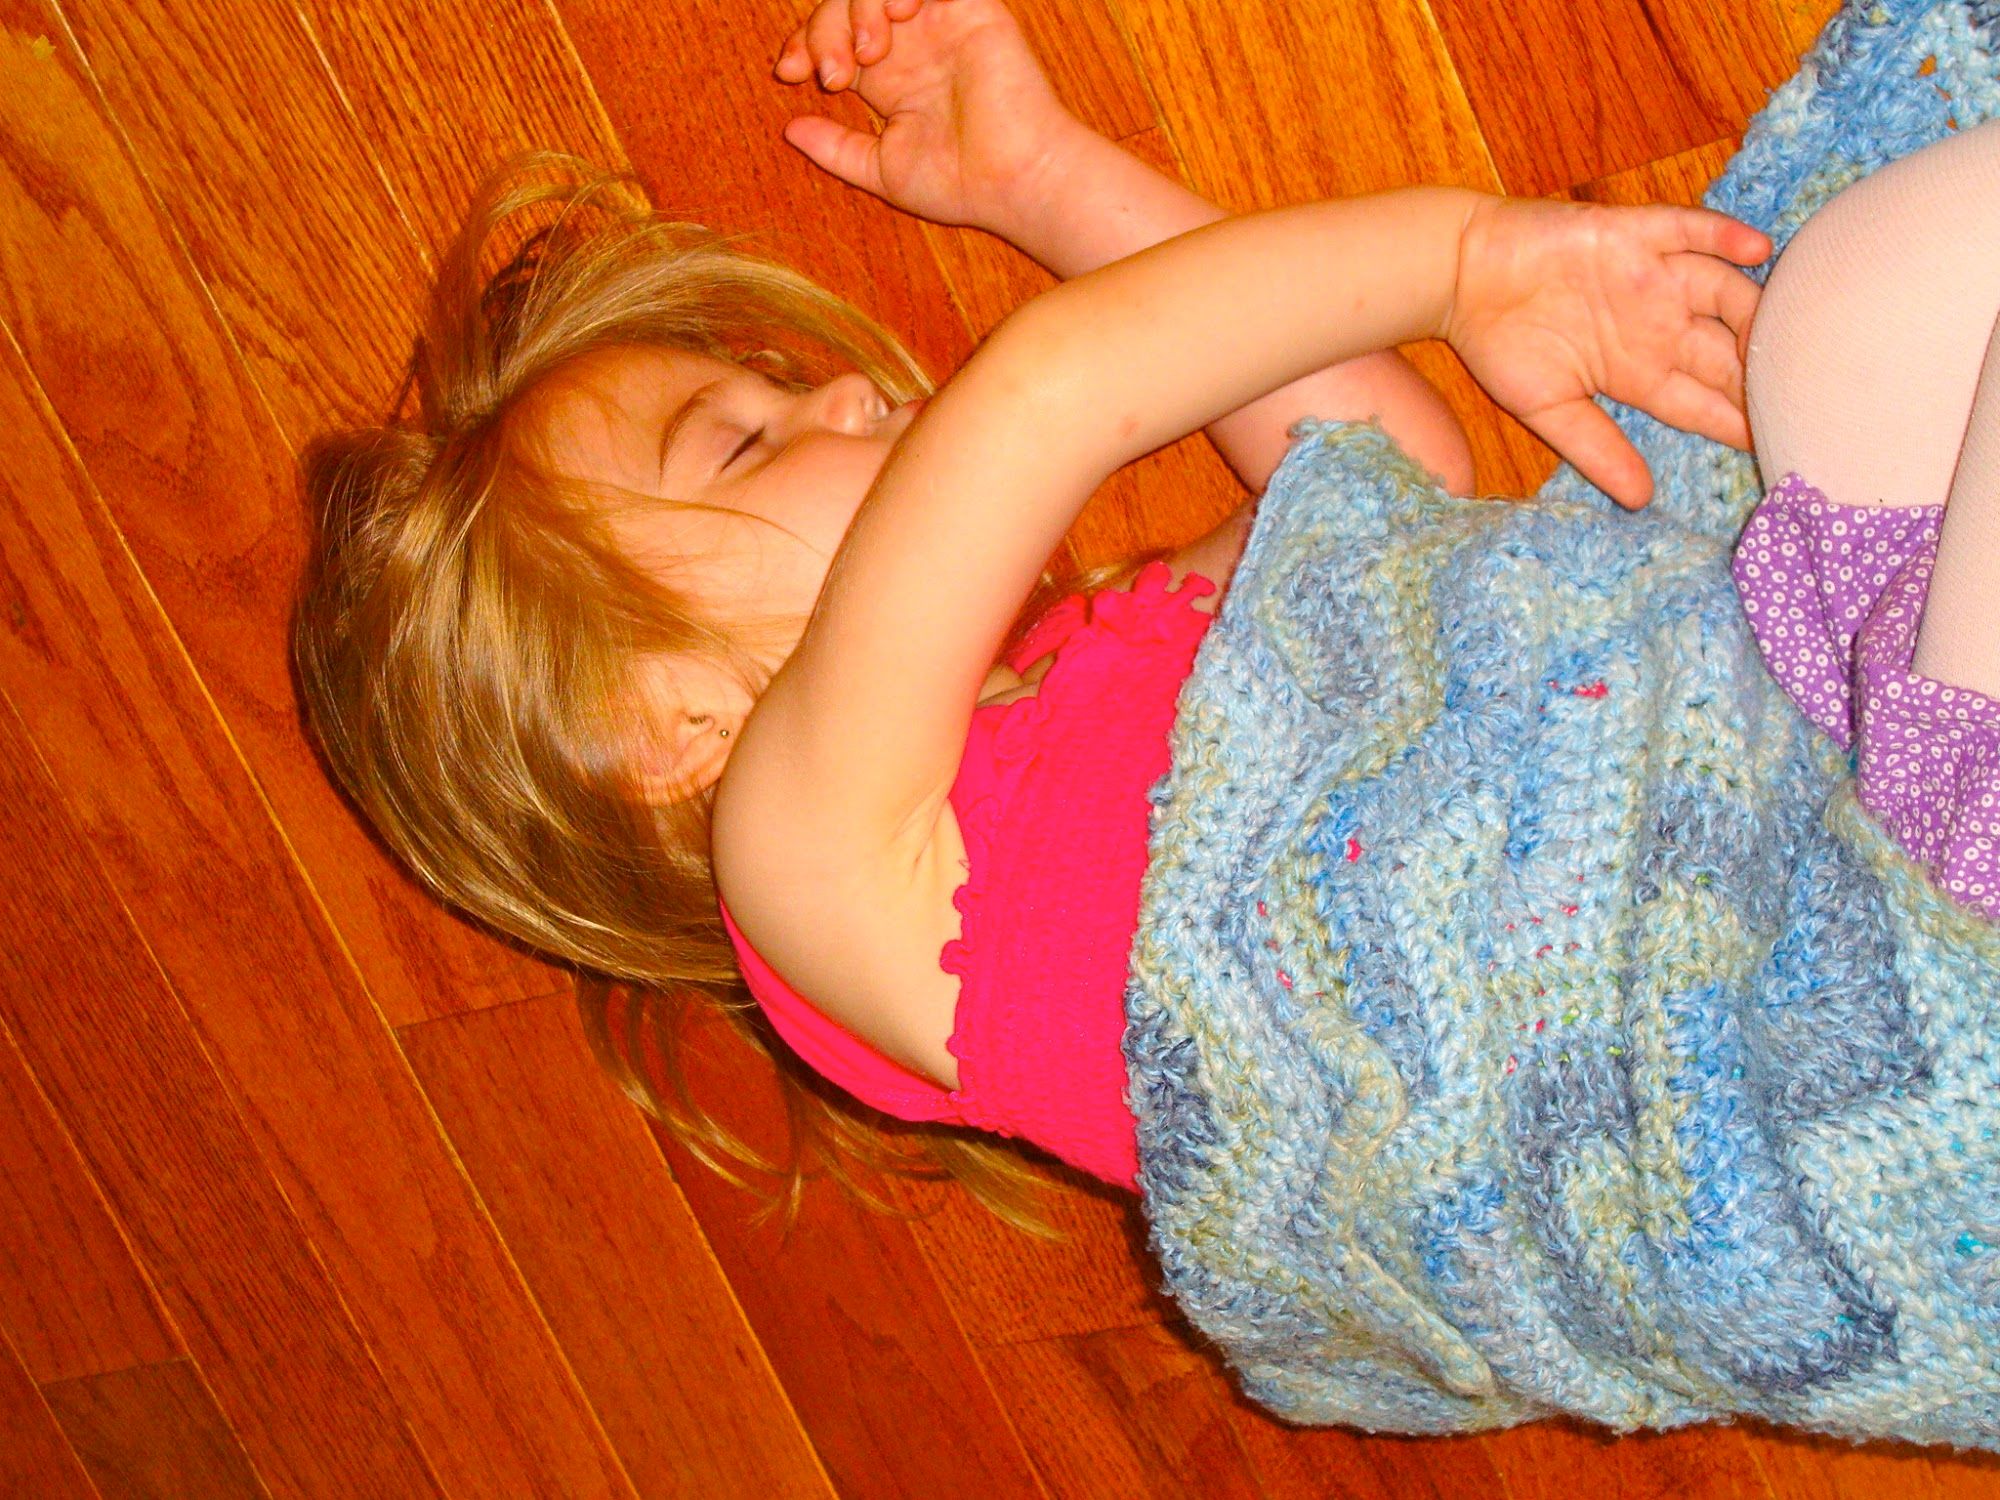  Close up of her on the hardwood floor. Seriously, is that comfortable? 